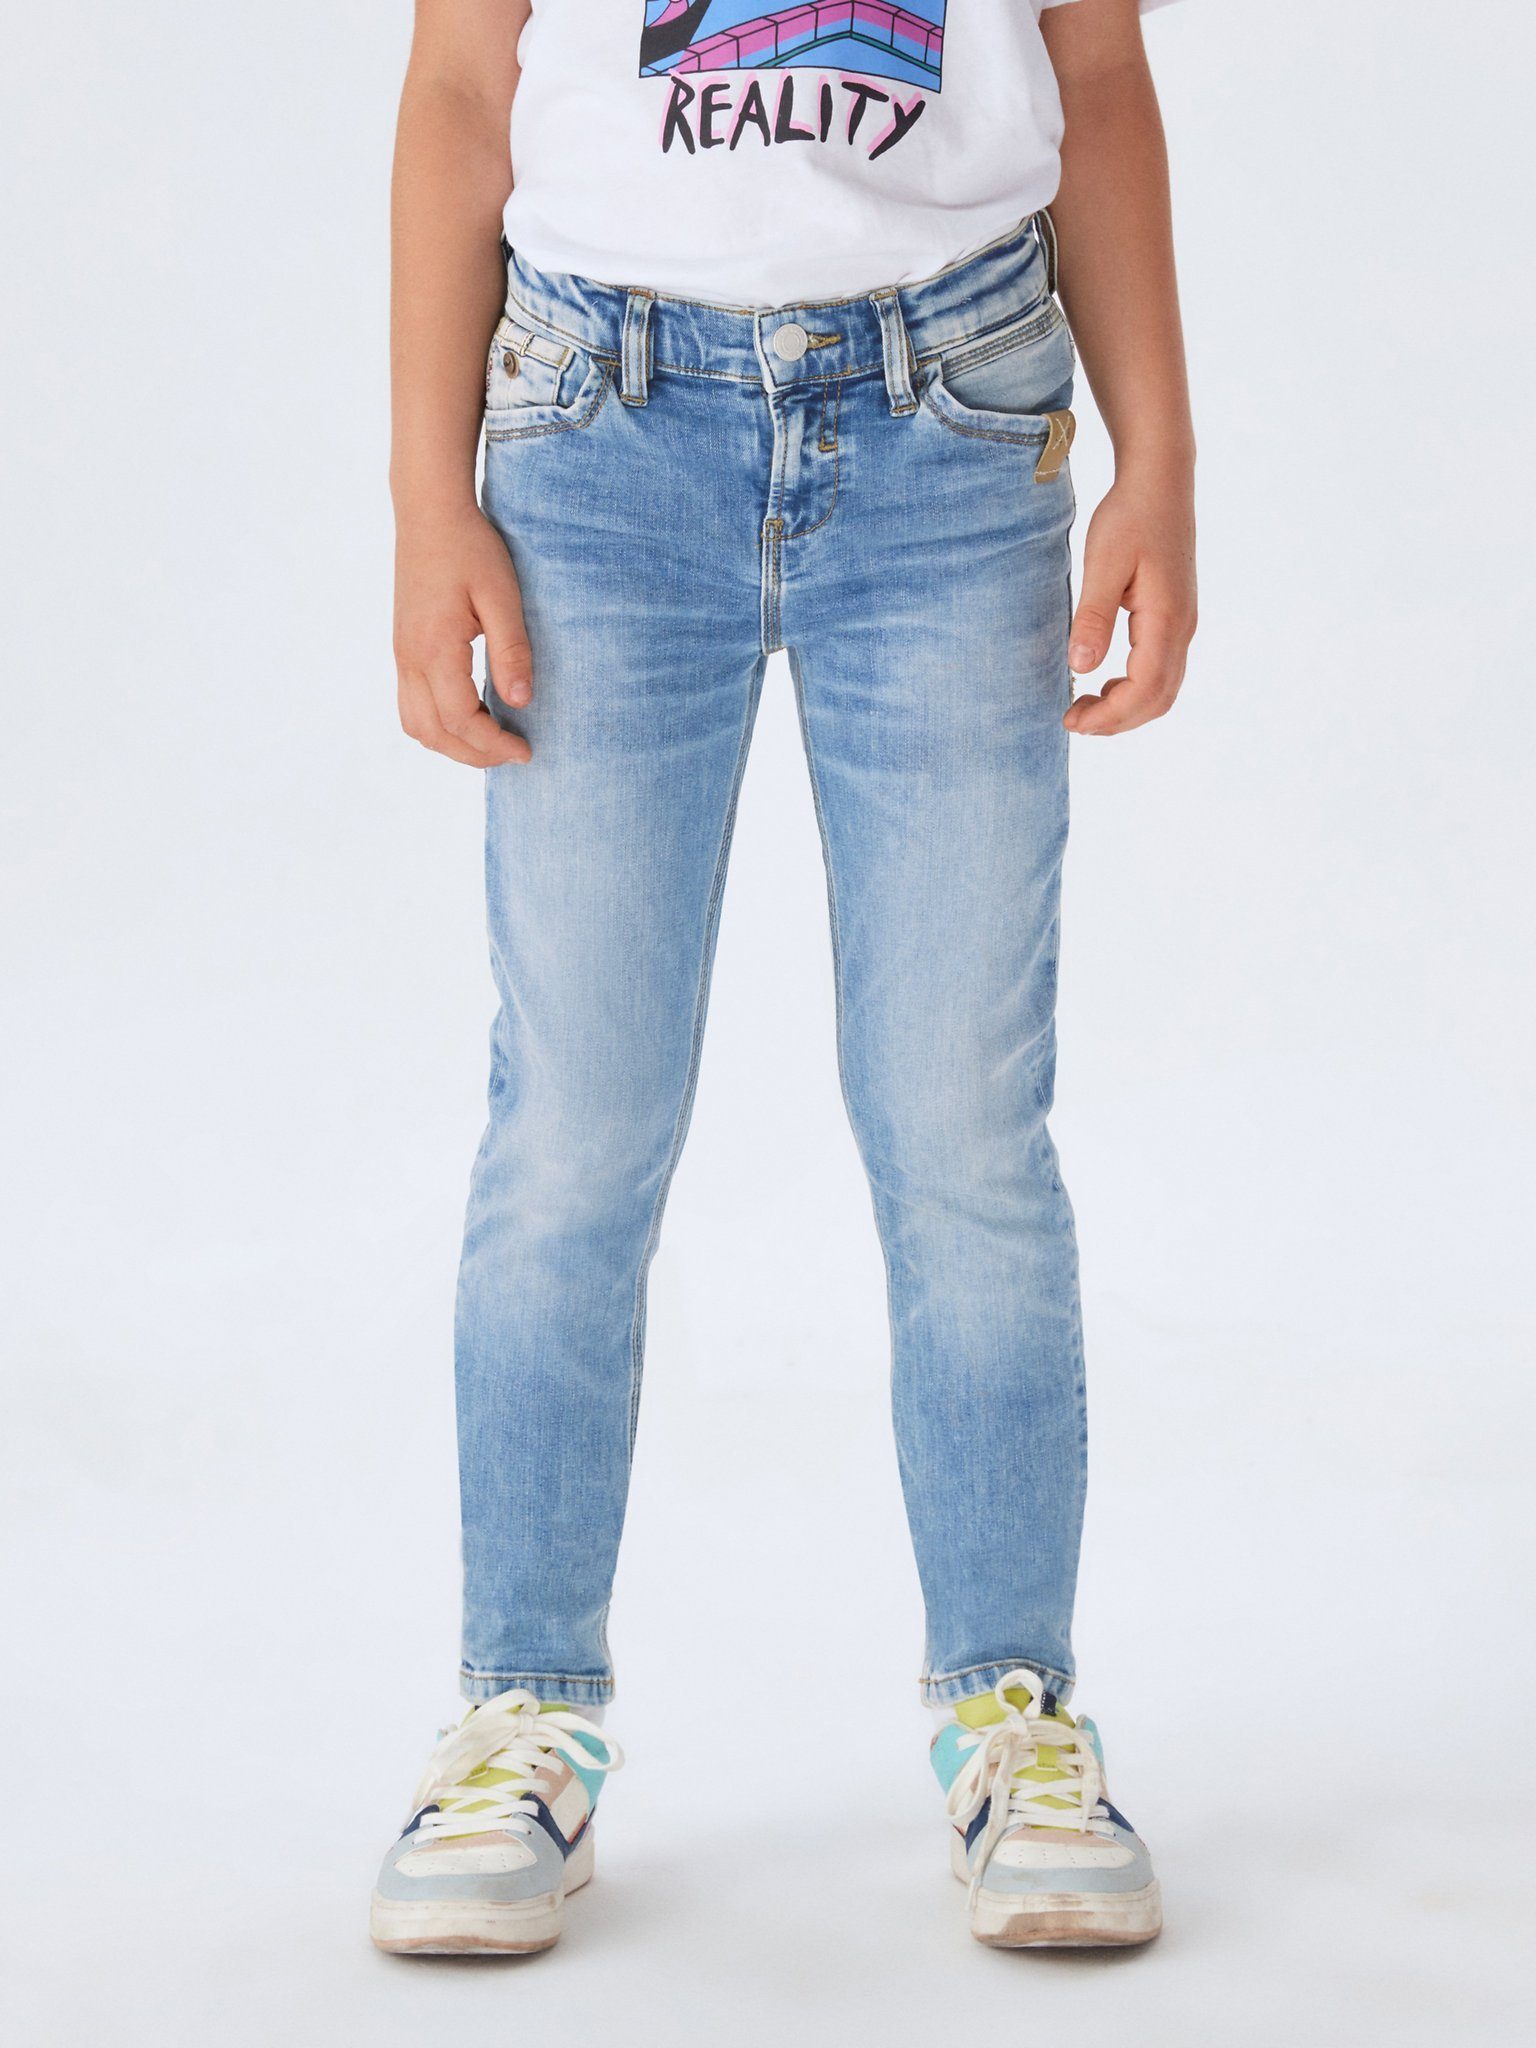 Cayle LTB Jeans LTB Skinny-fit-Jeans Ennio Wash B